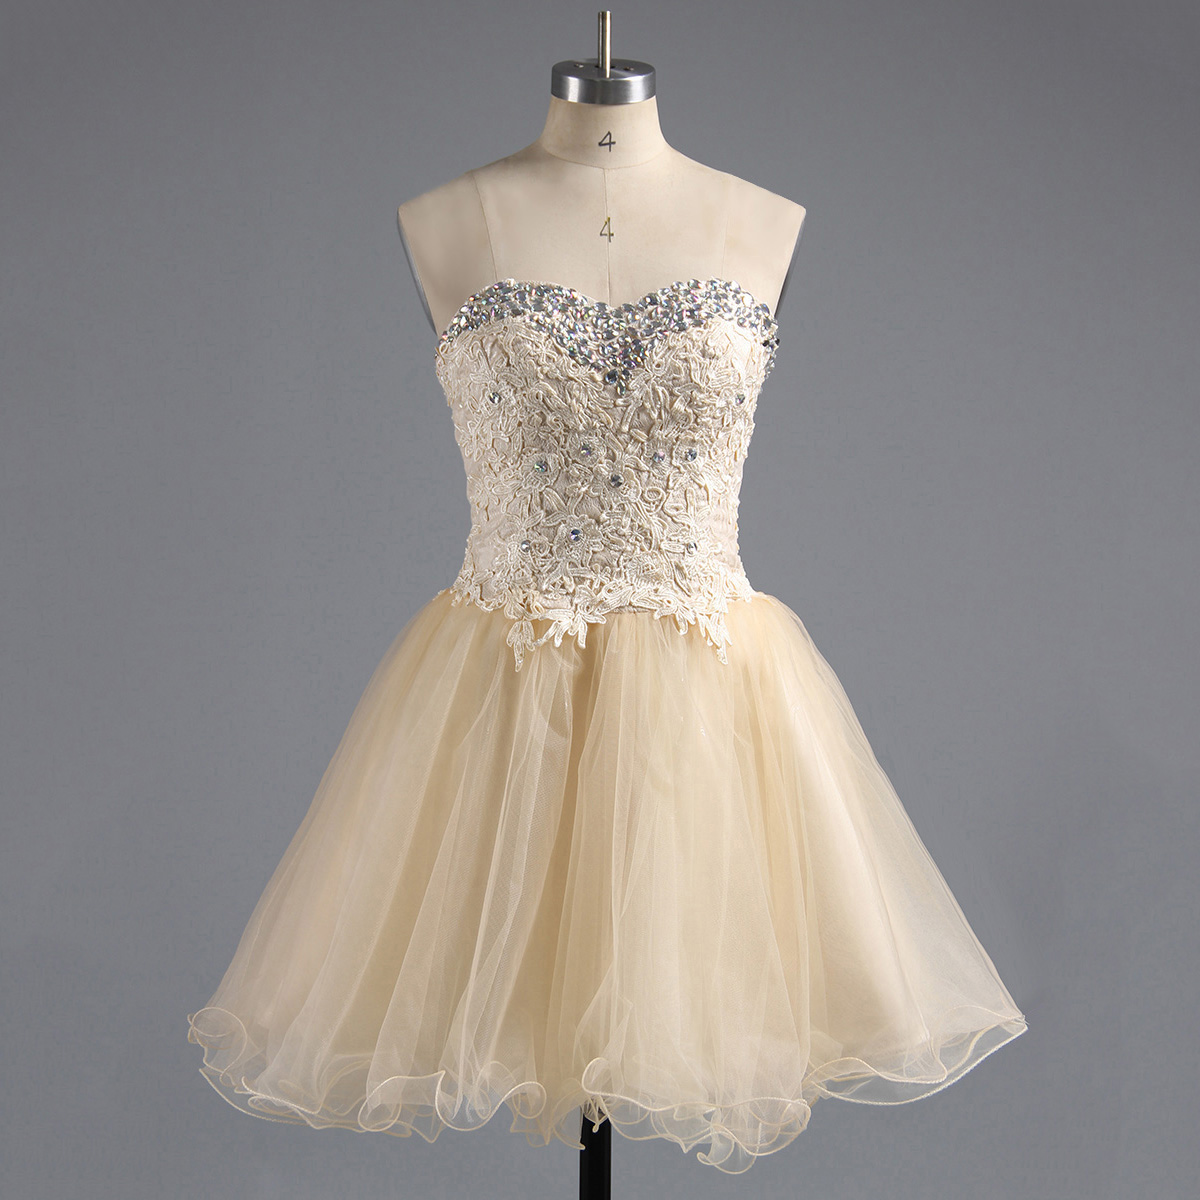 Strapless Sweetheart A-line Short Homecoming Dress With Floral Appliqués And Rhinestone Embellishment